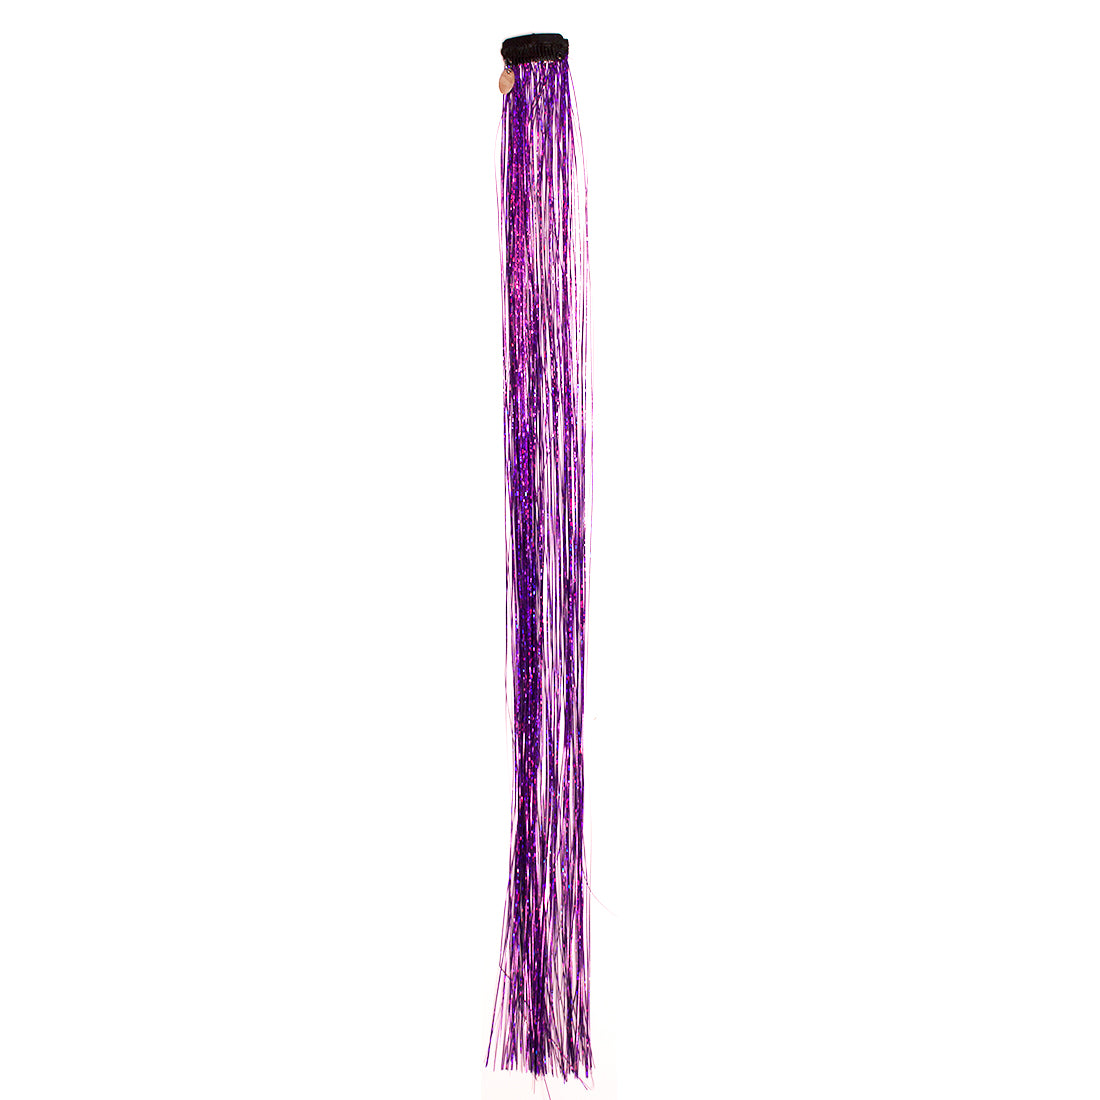 Mia® Clip-n-Bling® sparkly tinsel on a weft clip - hair accessory - purple color - Invented by #MiaKaminski of #MiaBeauty